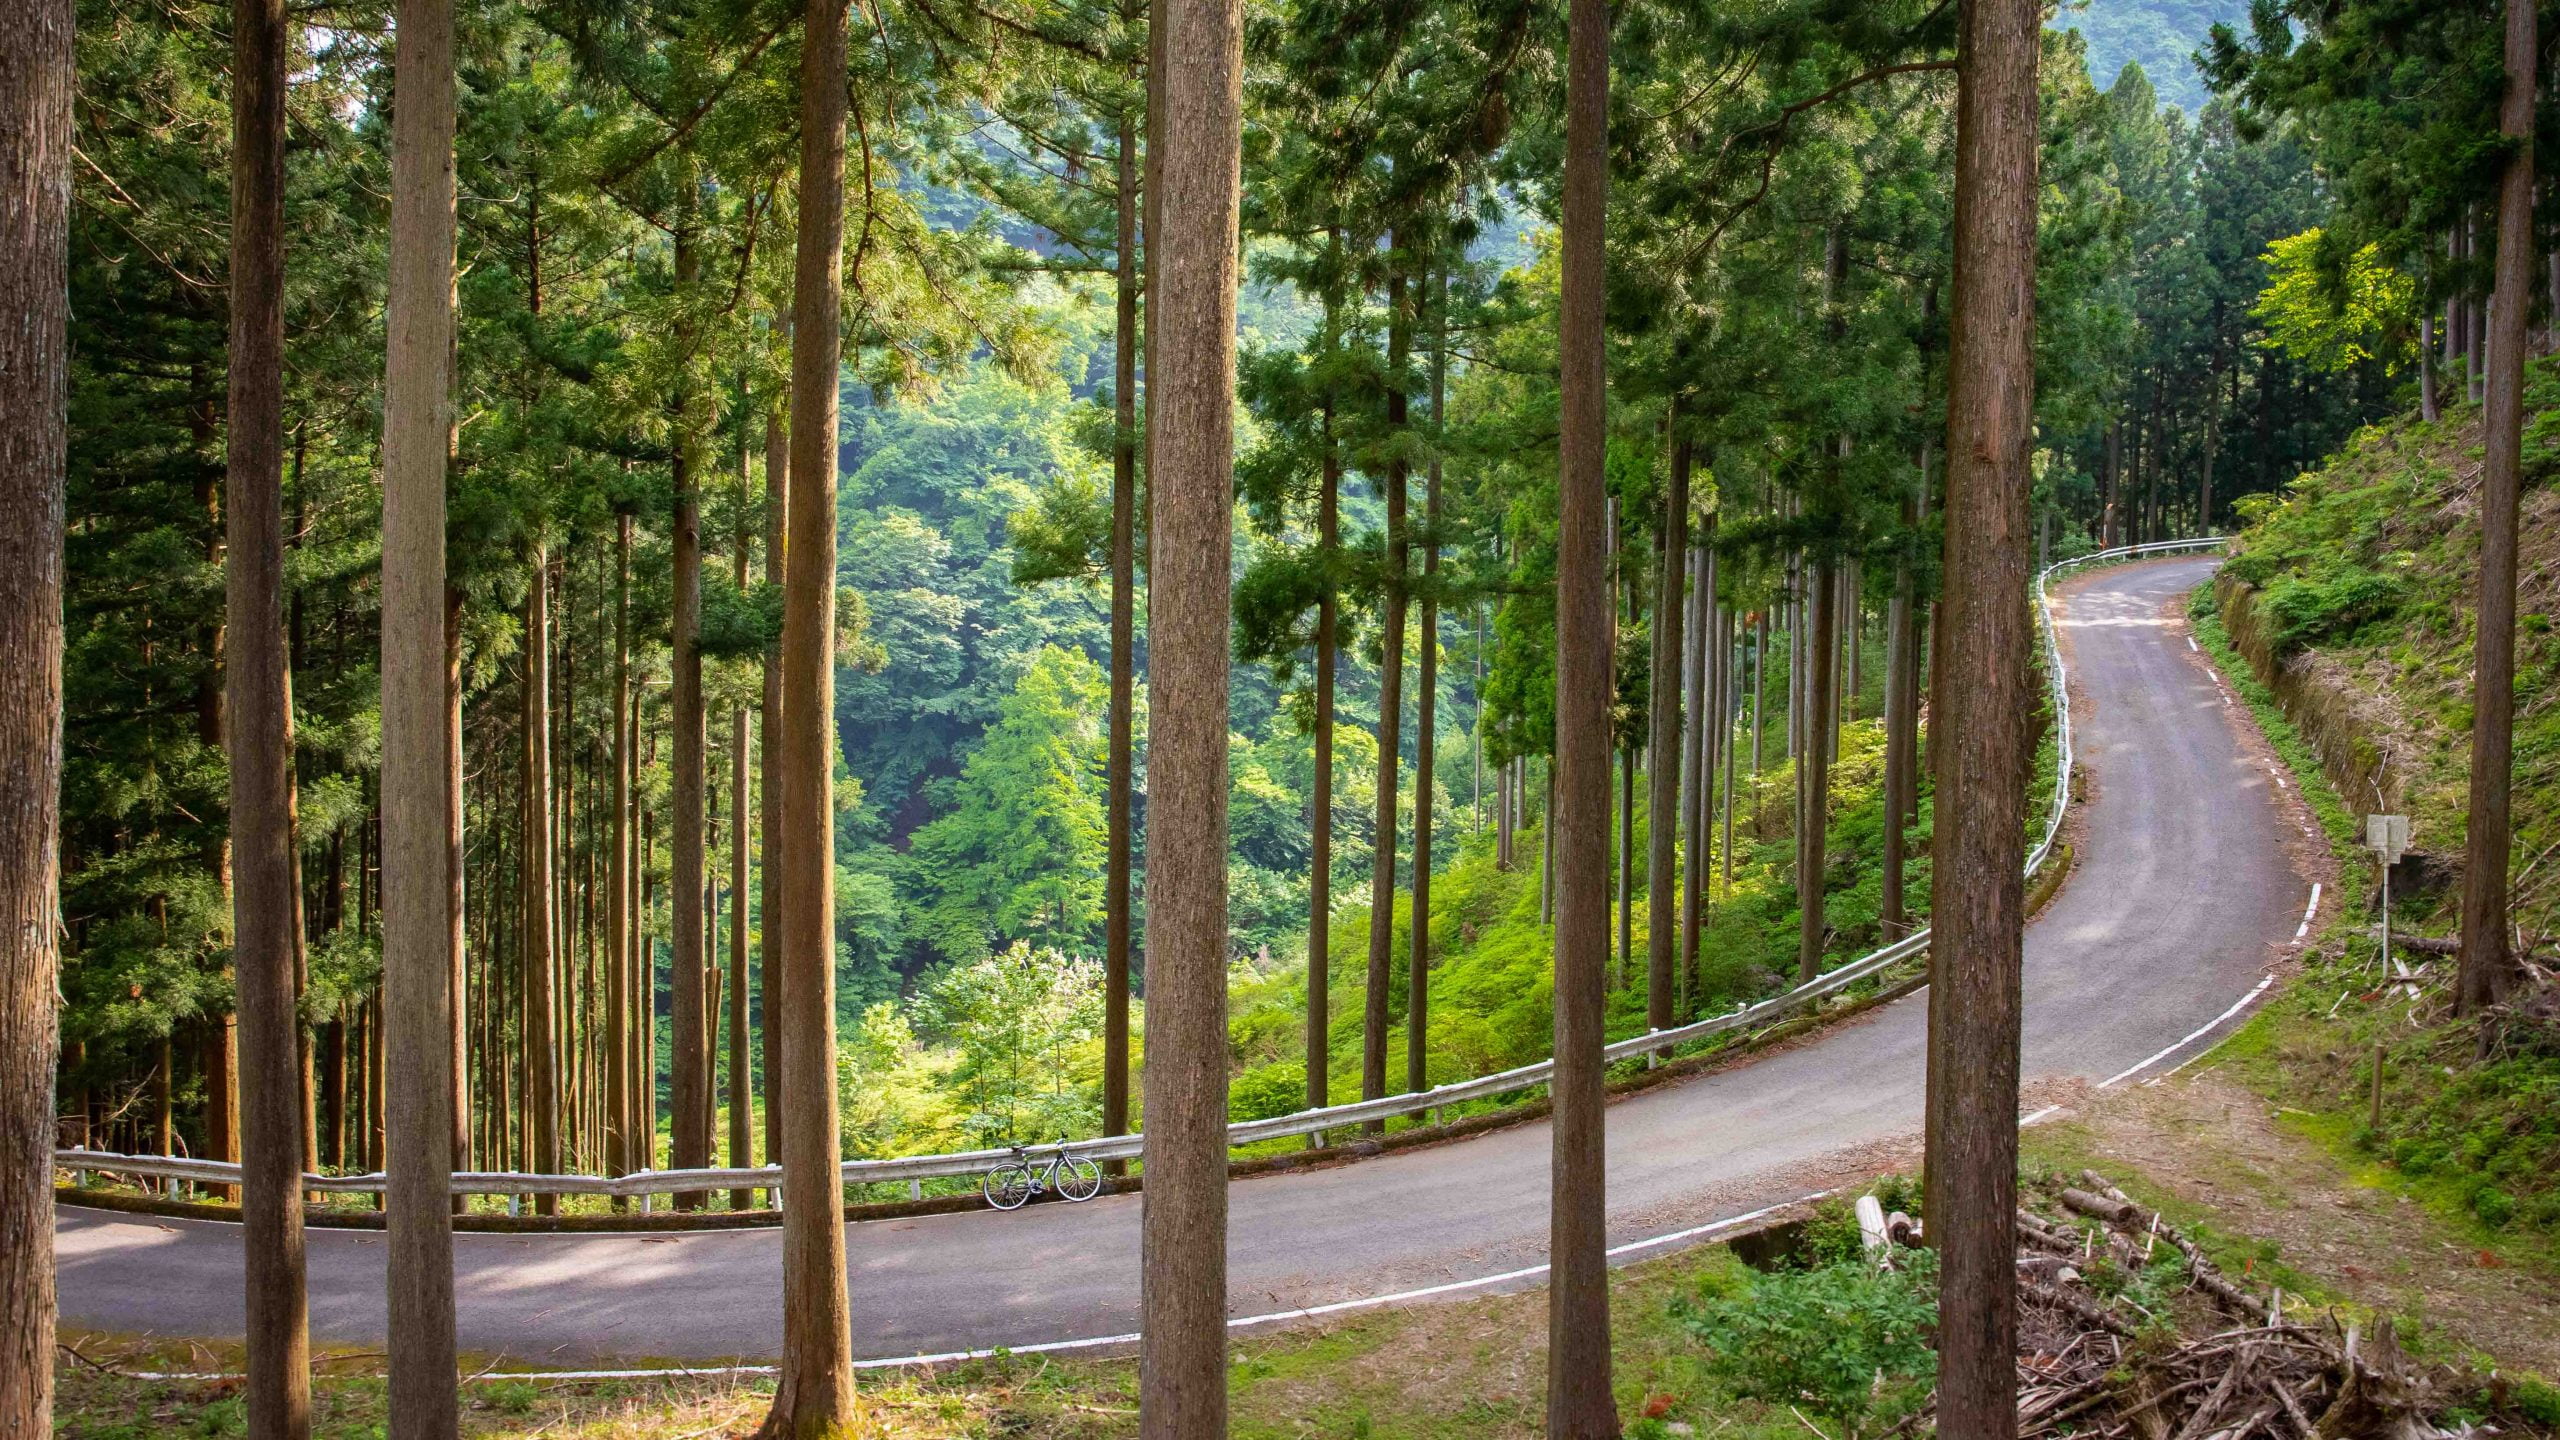 Road through the forest on a cycling tour in Japan